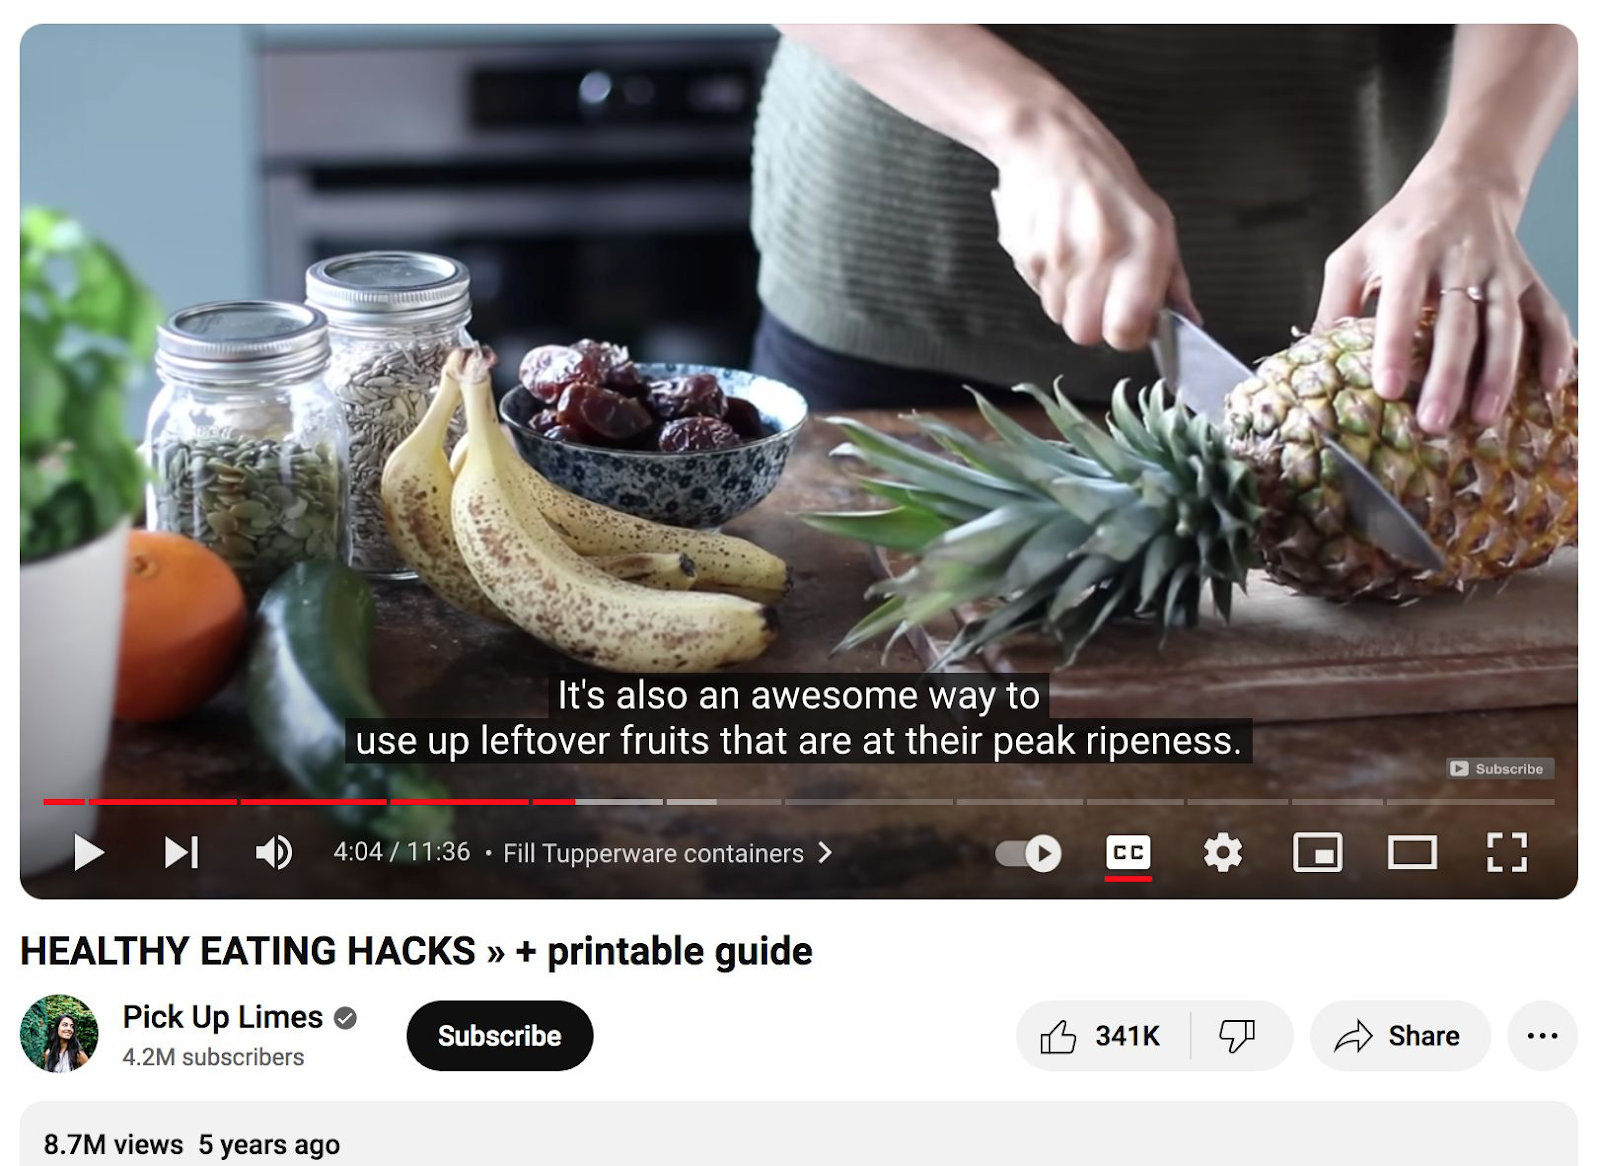 Pick Up Limes's YouTube video on healthy eating hacks